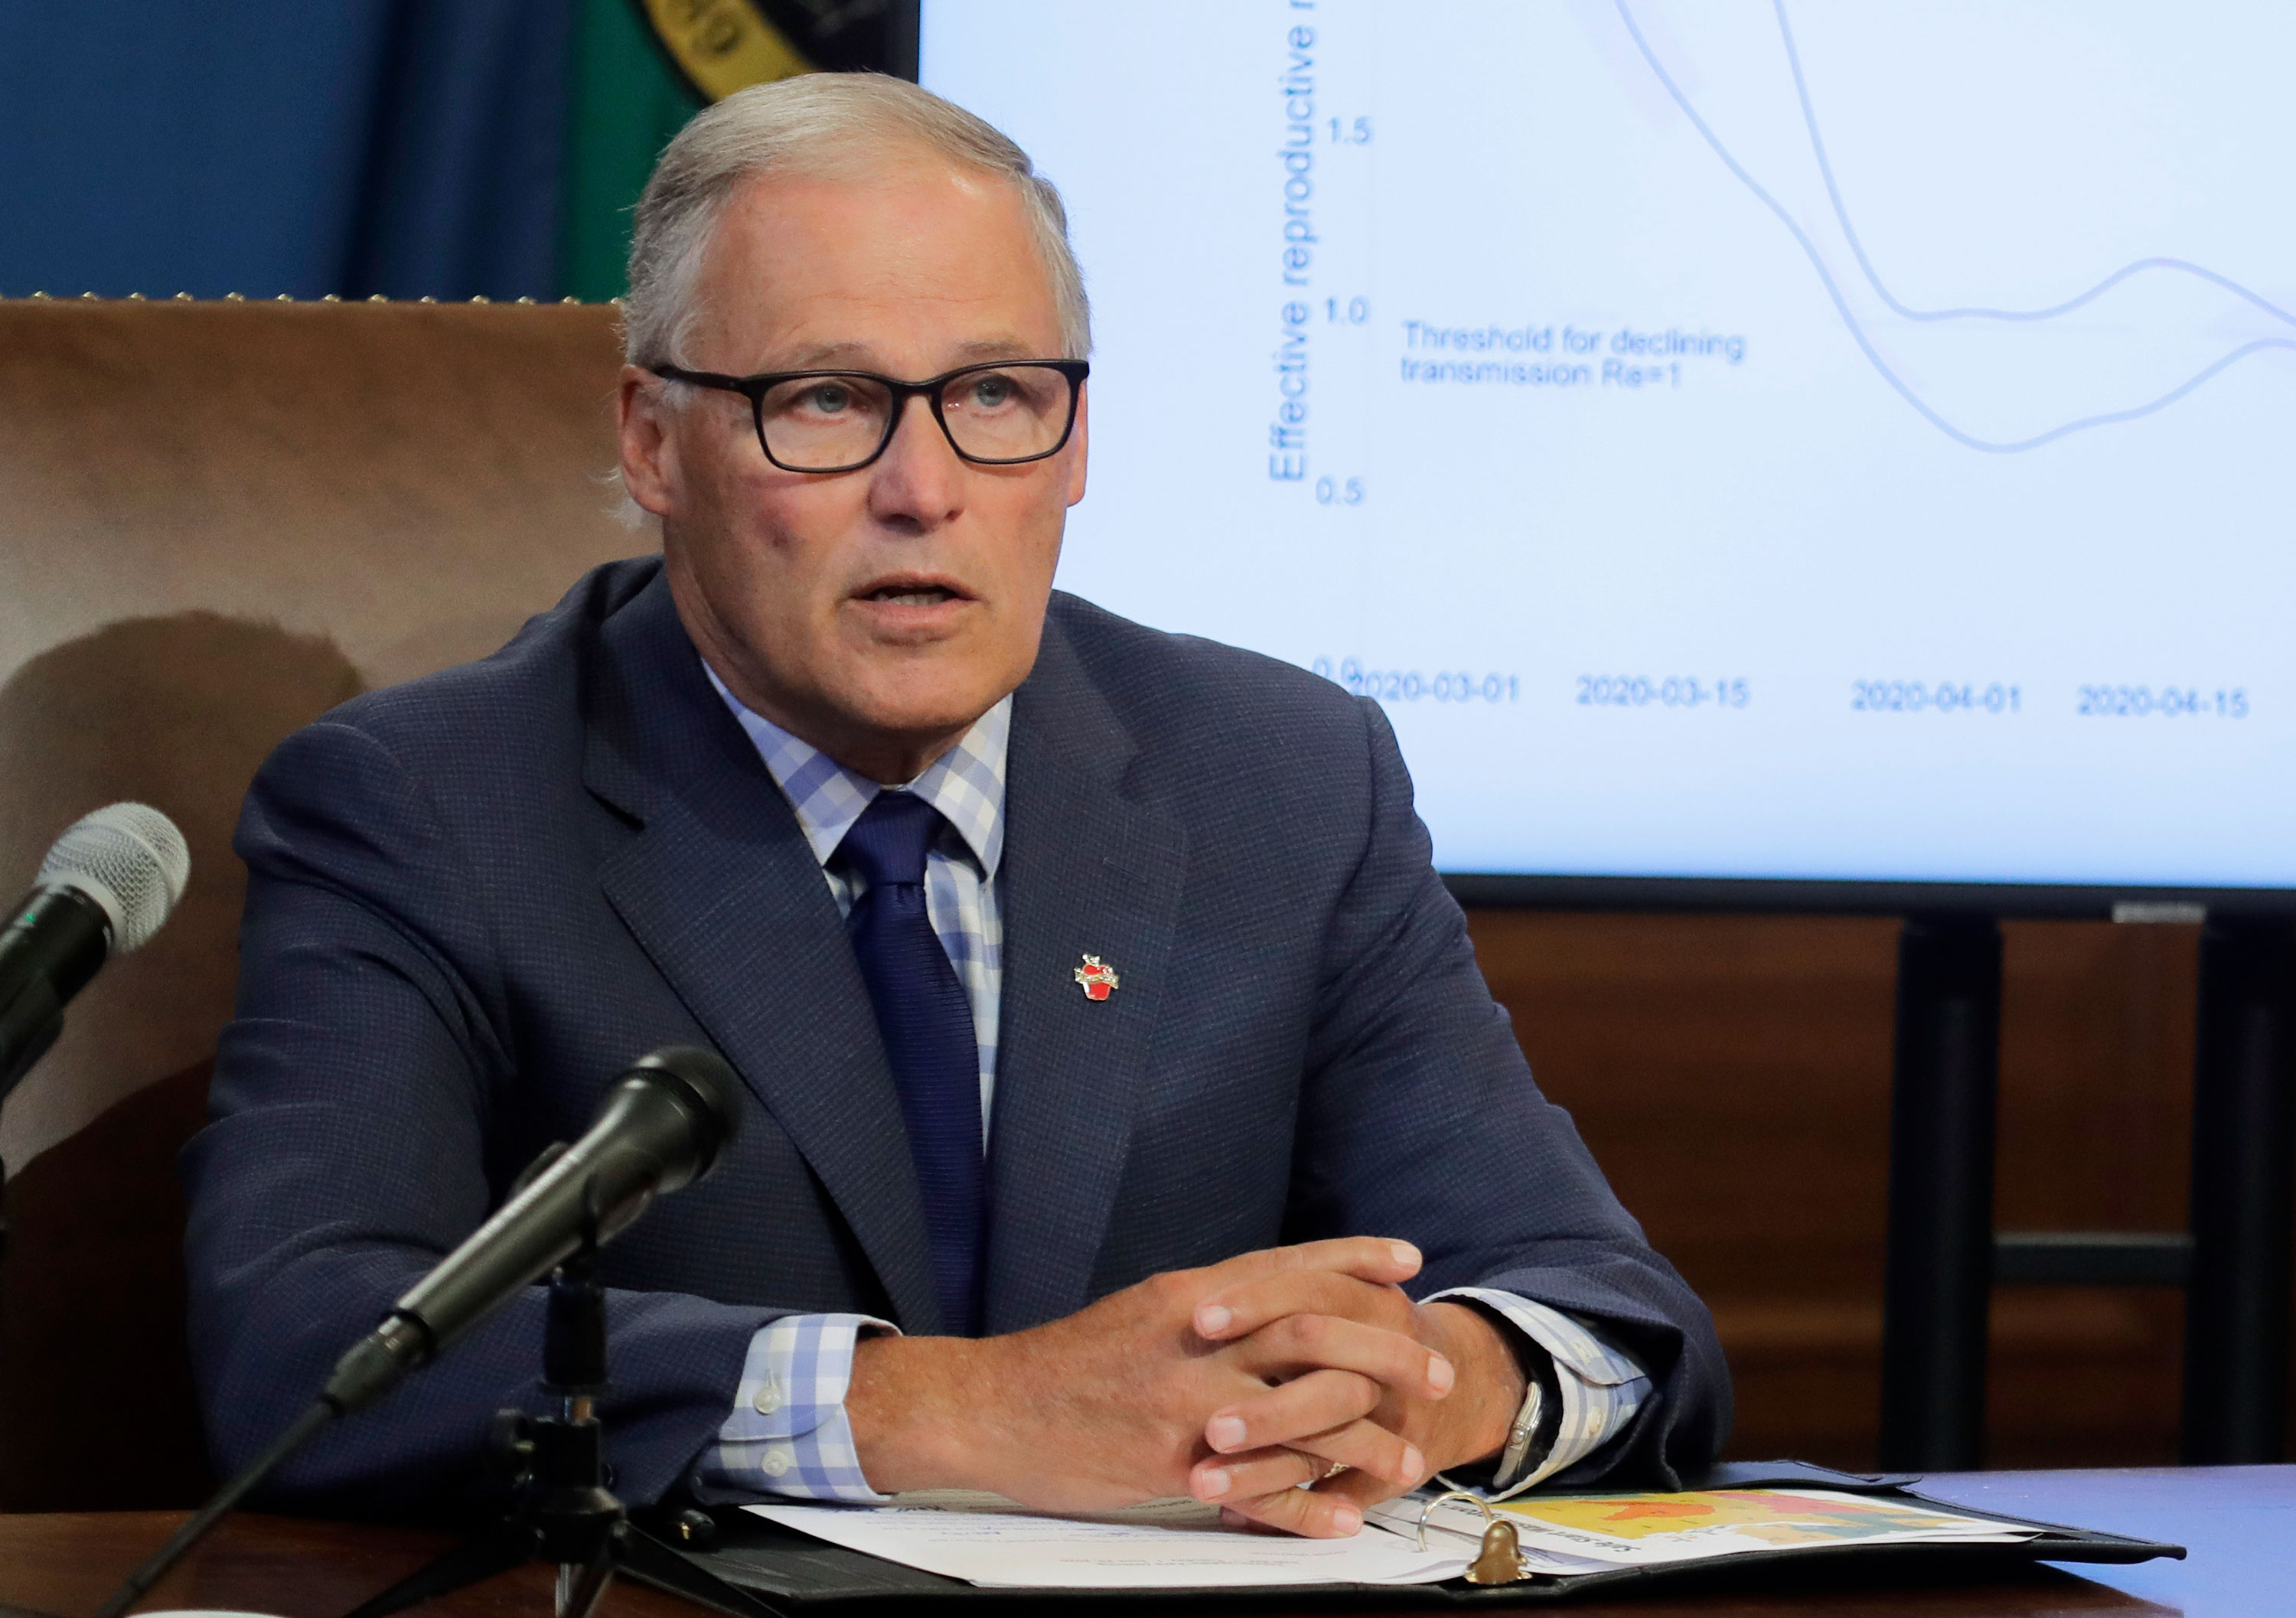 Washington Gov. Jay Inslee speaks at a news conference on June 23 at the Capitol in Olympia, Washington.